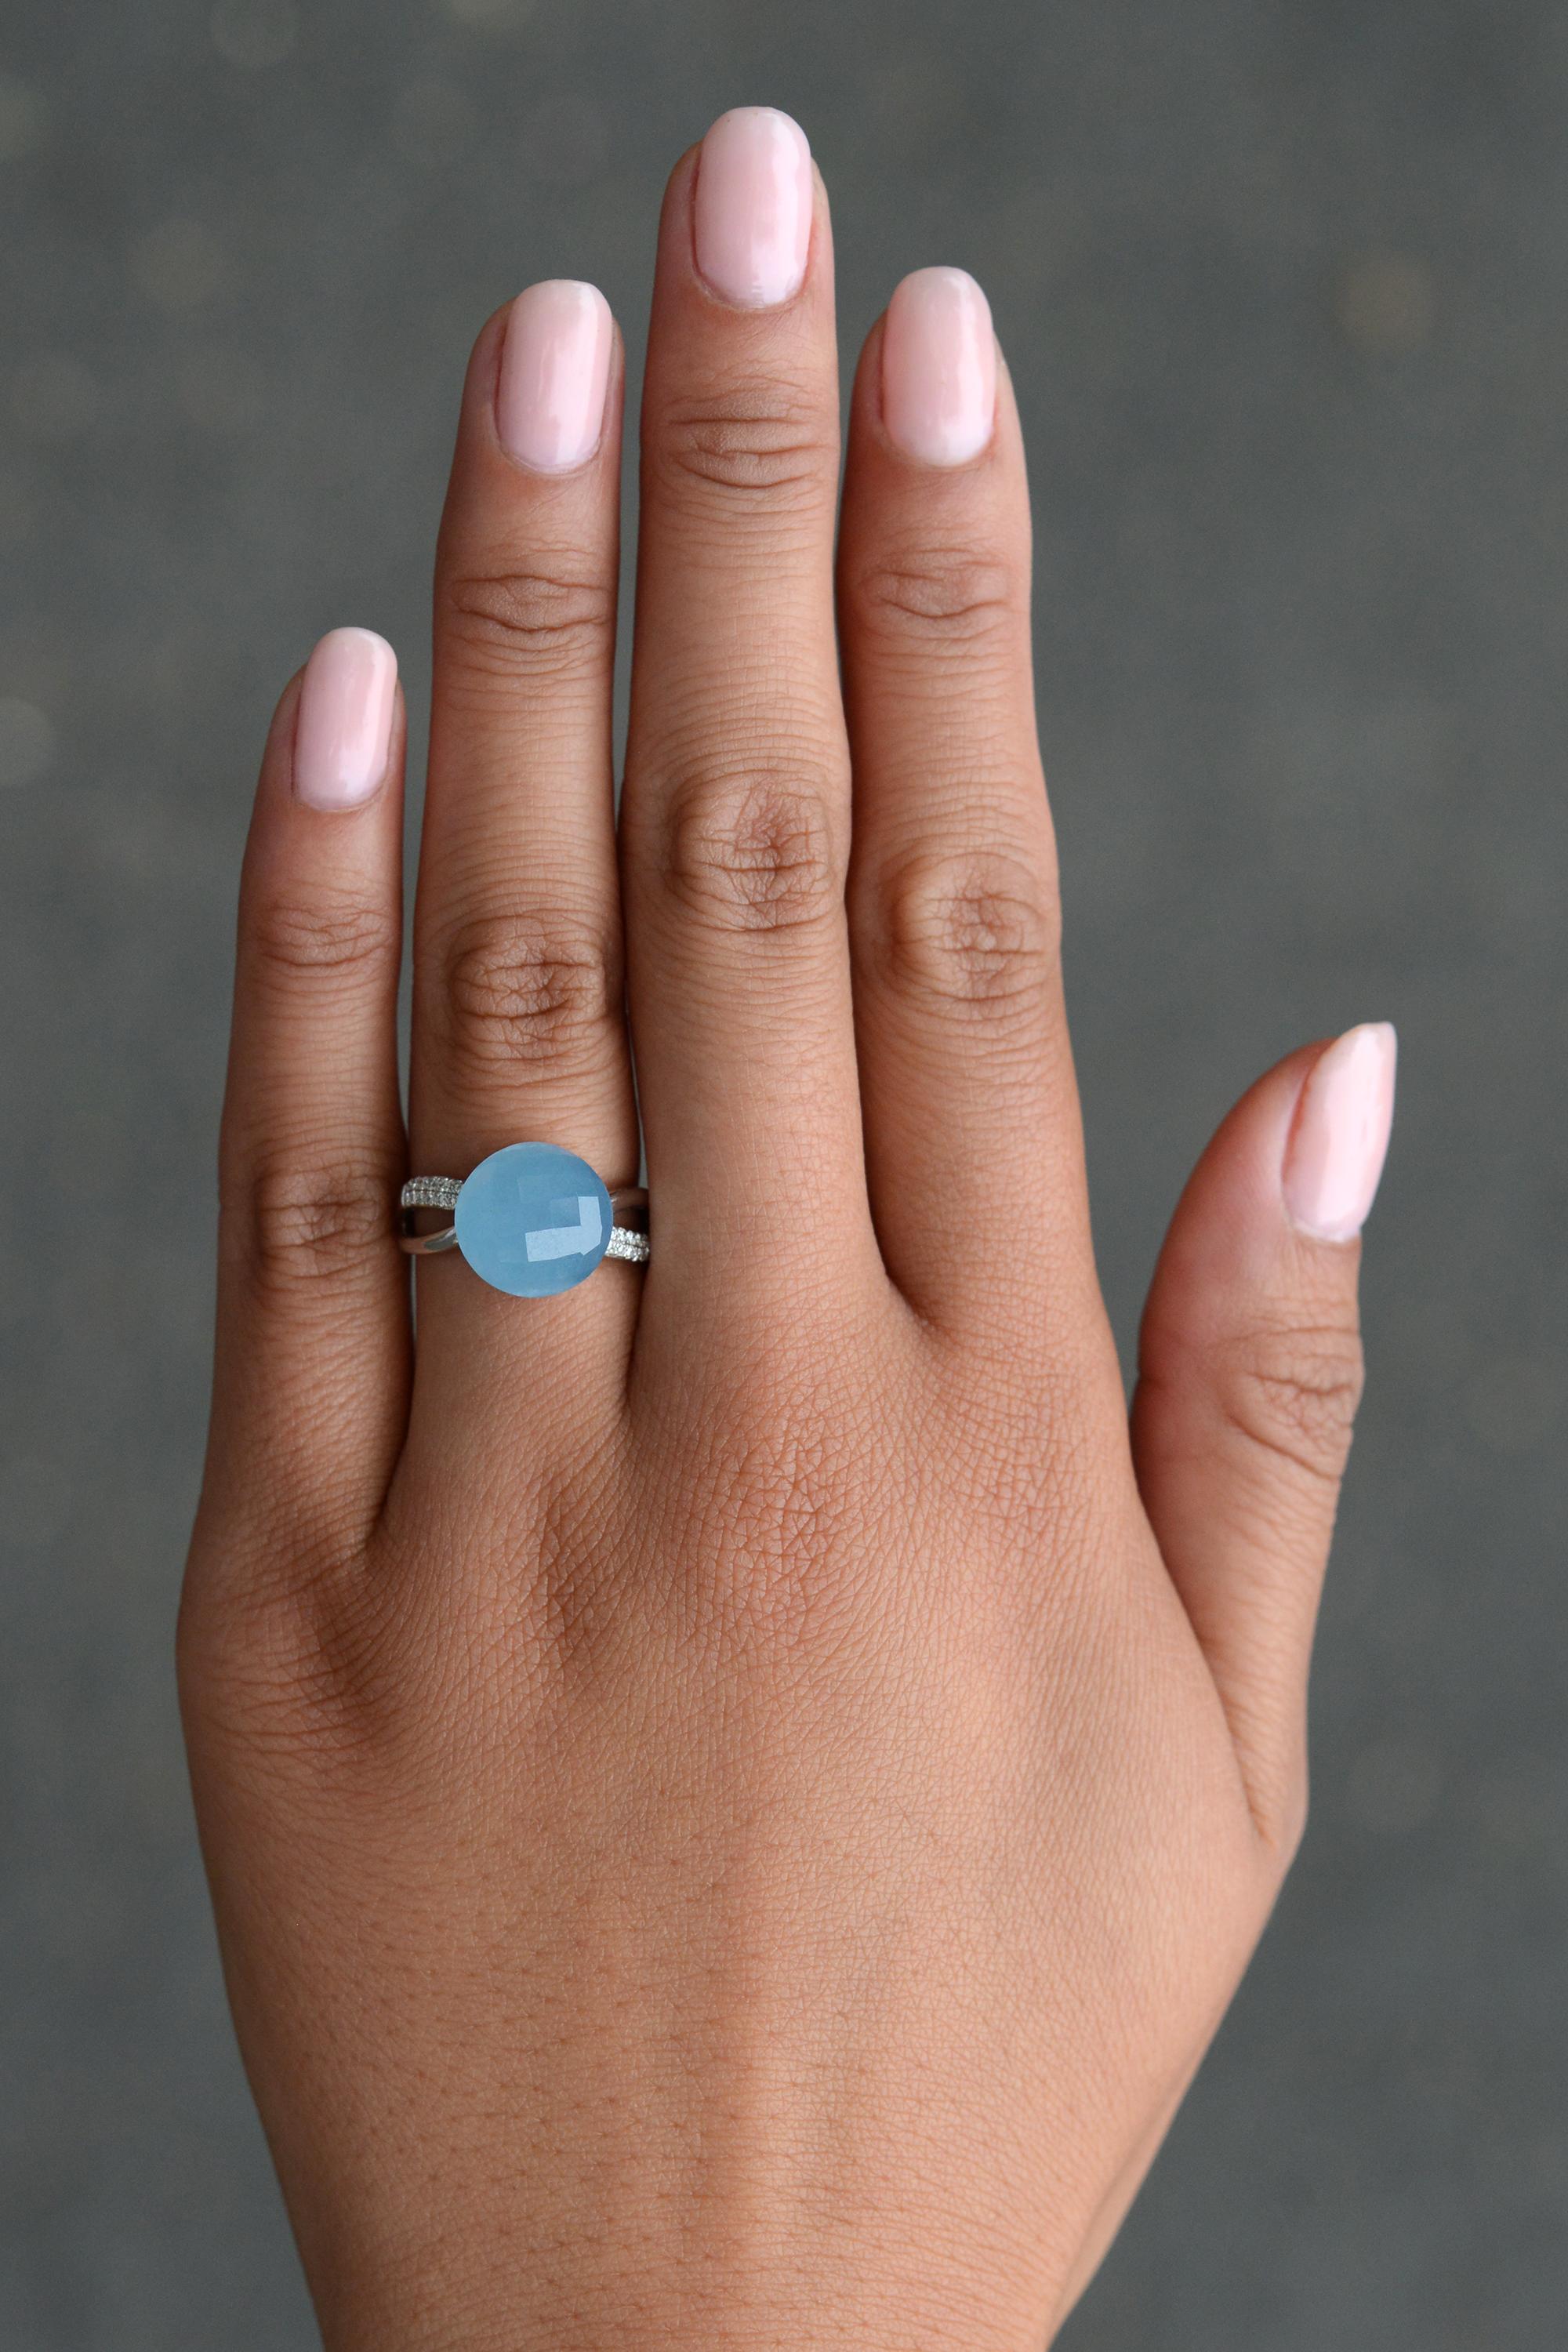 A spectacular contemporary dome ring uniquely handmade in 14k white gold featuring a natural, icy-blue chalcedony faceted cabochon embellished with 24 shimmering diamond accents. This intriguing gemstone is renowned for promoting harmony and